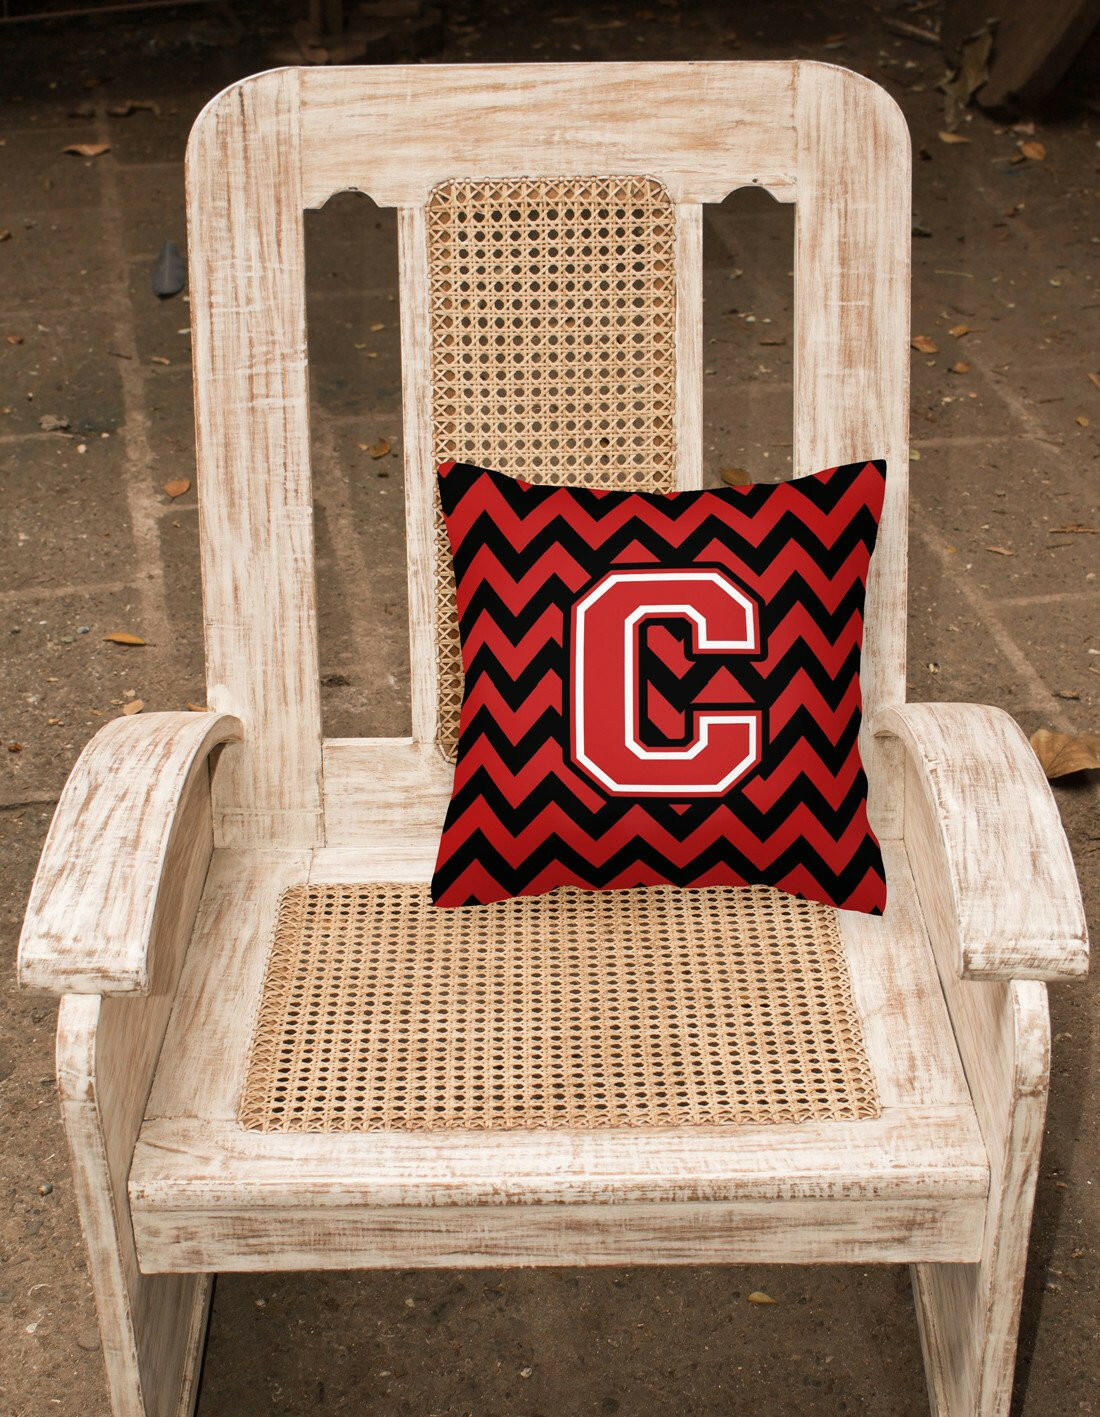 Letter C Chevron Black and Red   Fabric Decorative Pillow CJ1047-CPW1414 by Caroline's Treasures